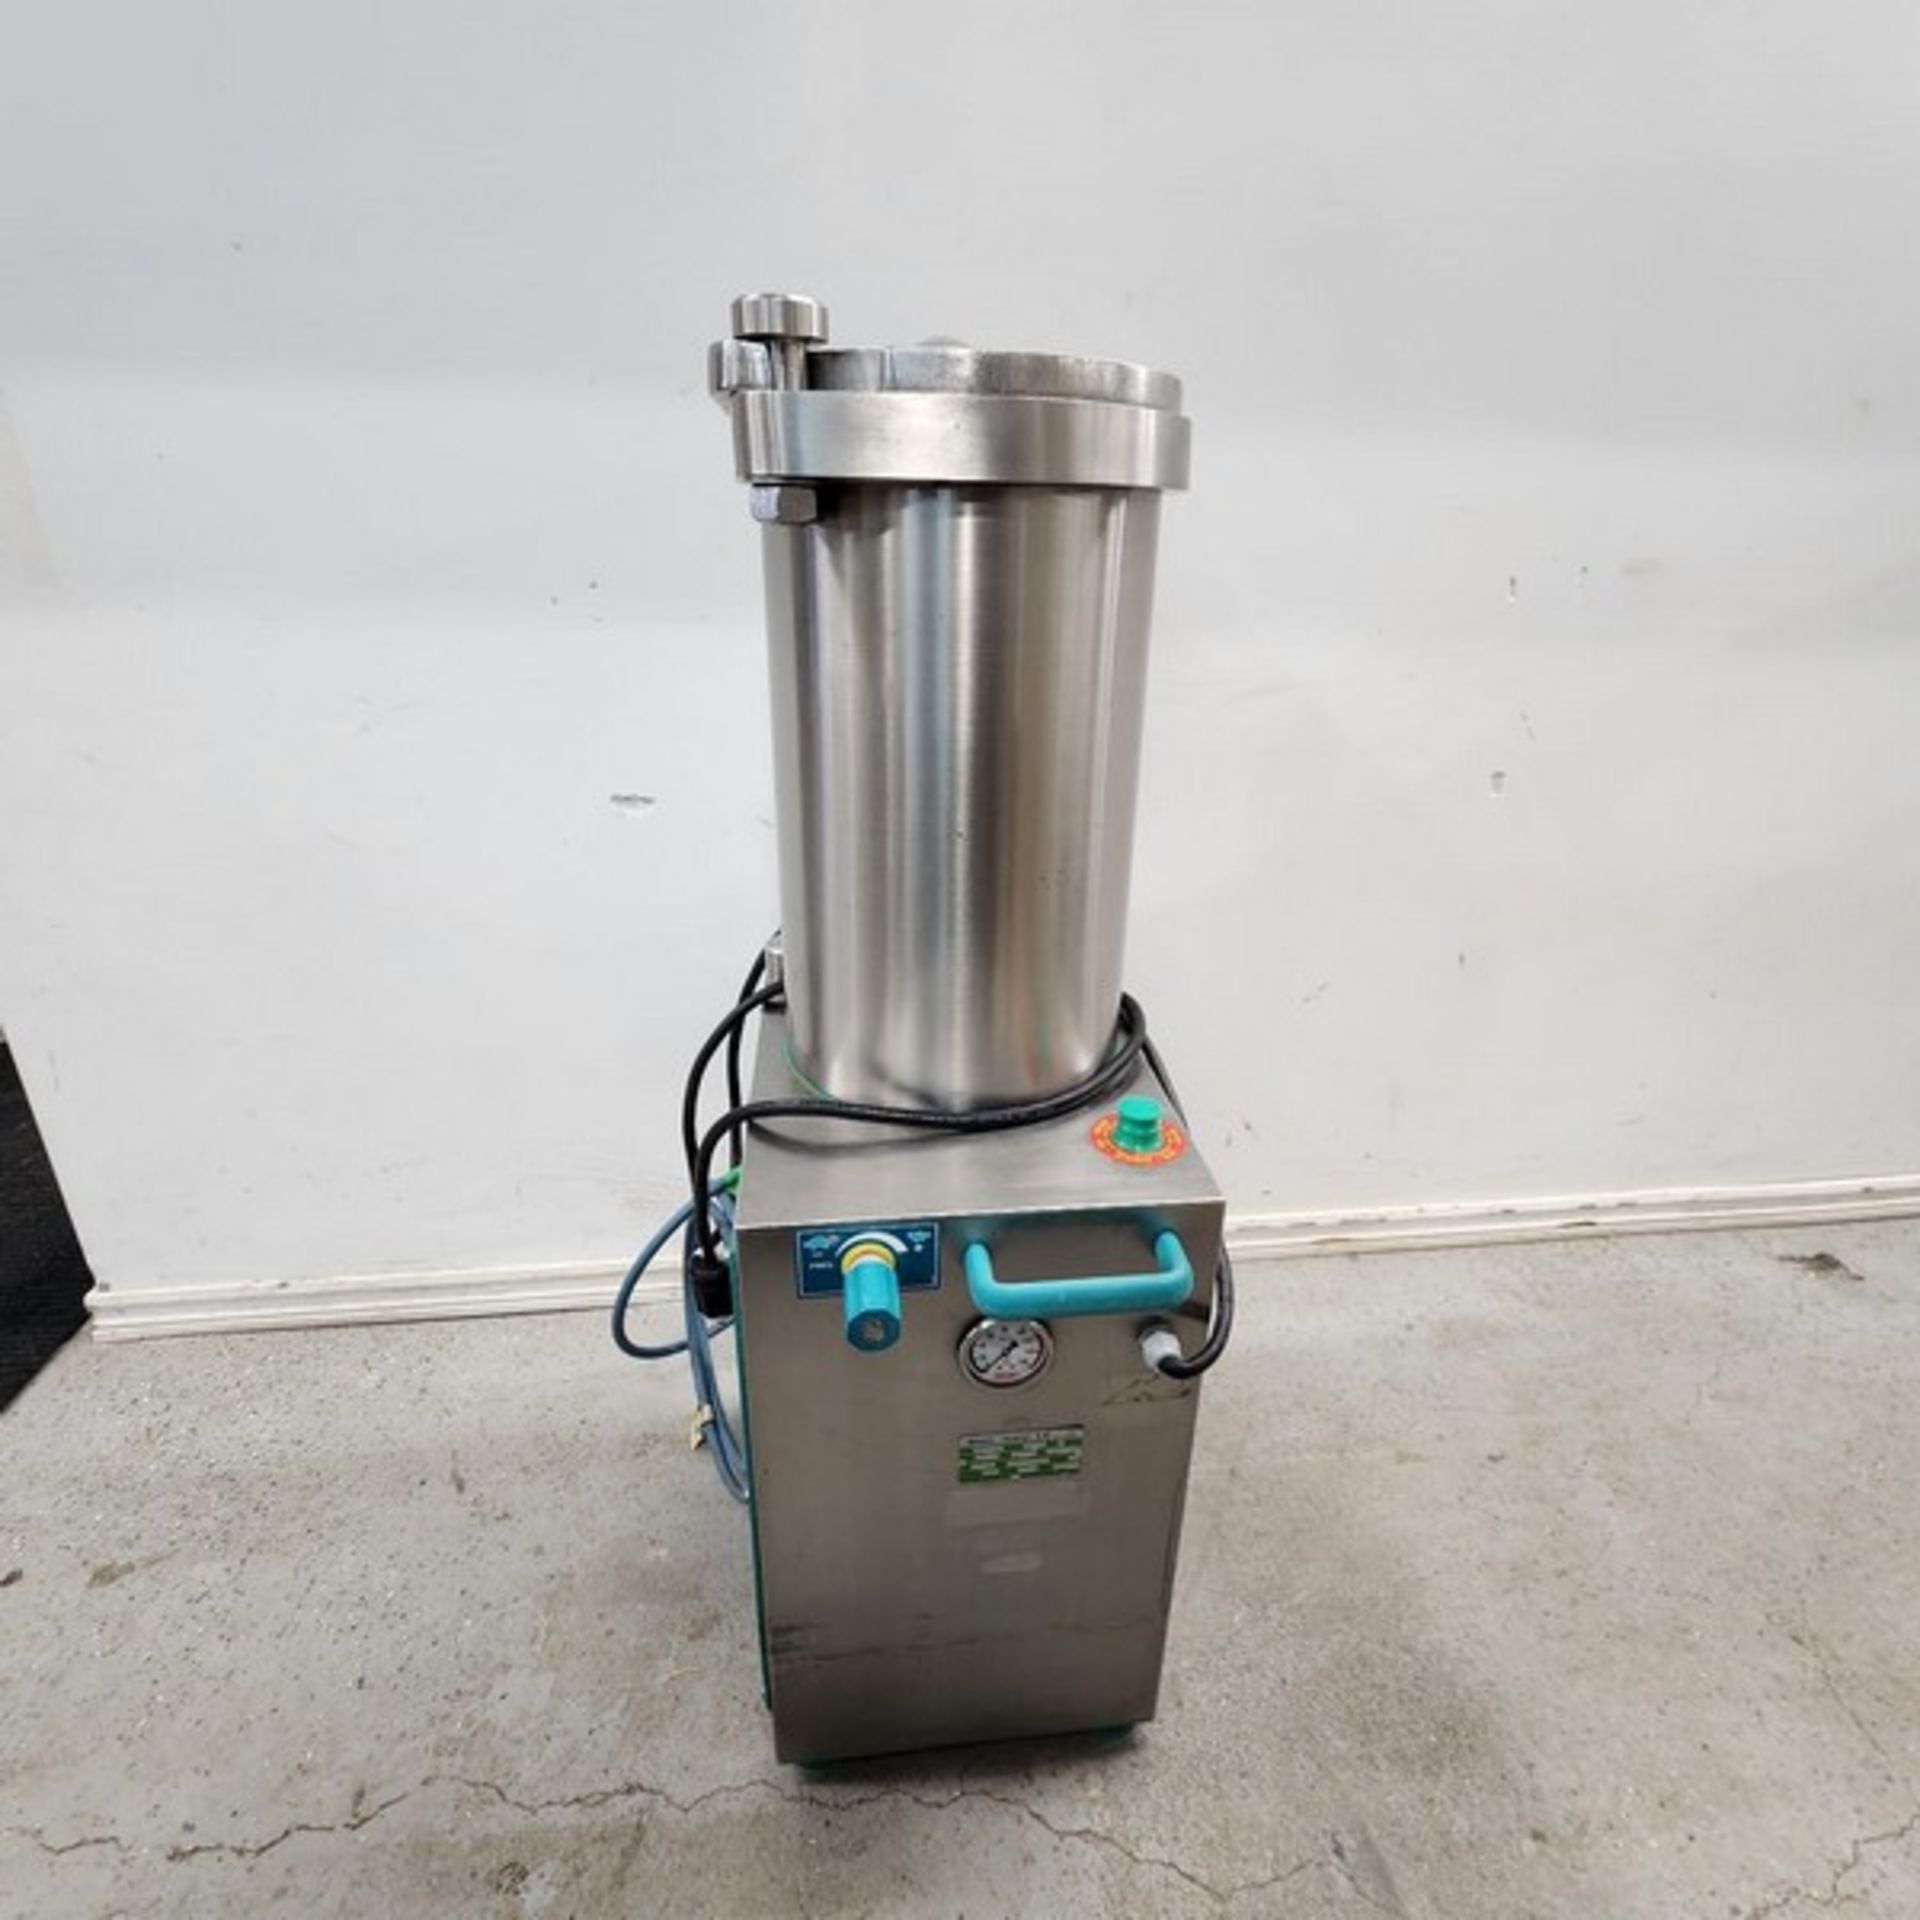 Omcan Sausage Stuffer model H25 110 volts 1 P year 2017 (Inv. #301I) (Loading Fee $150) (Located - Image 9 of 9